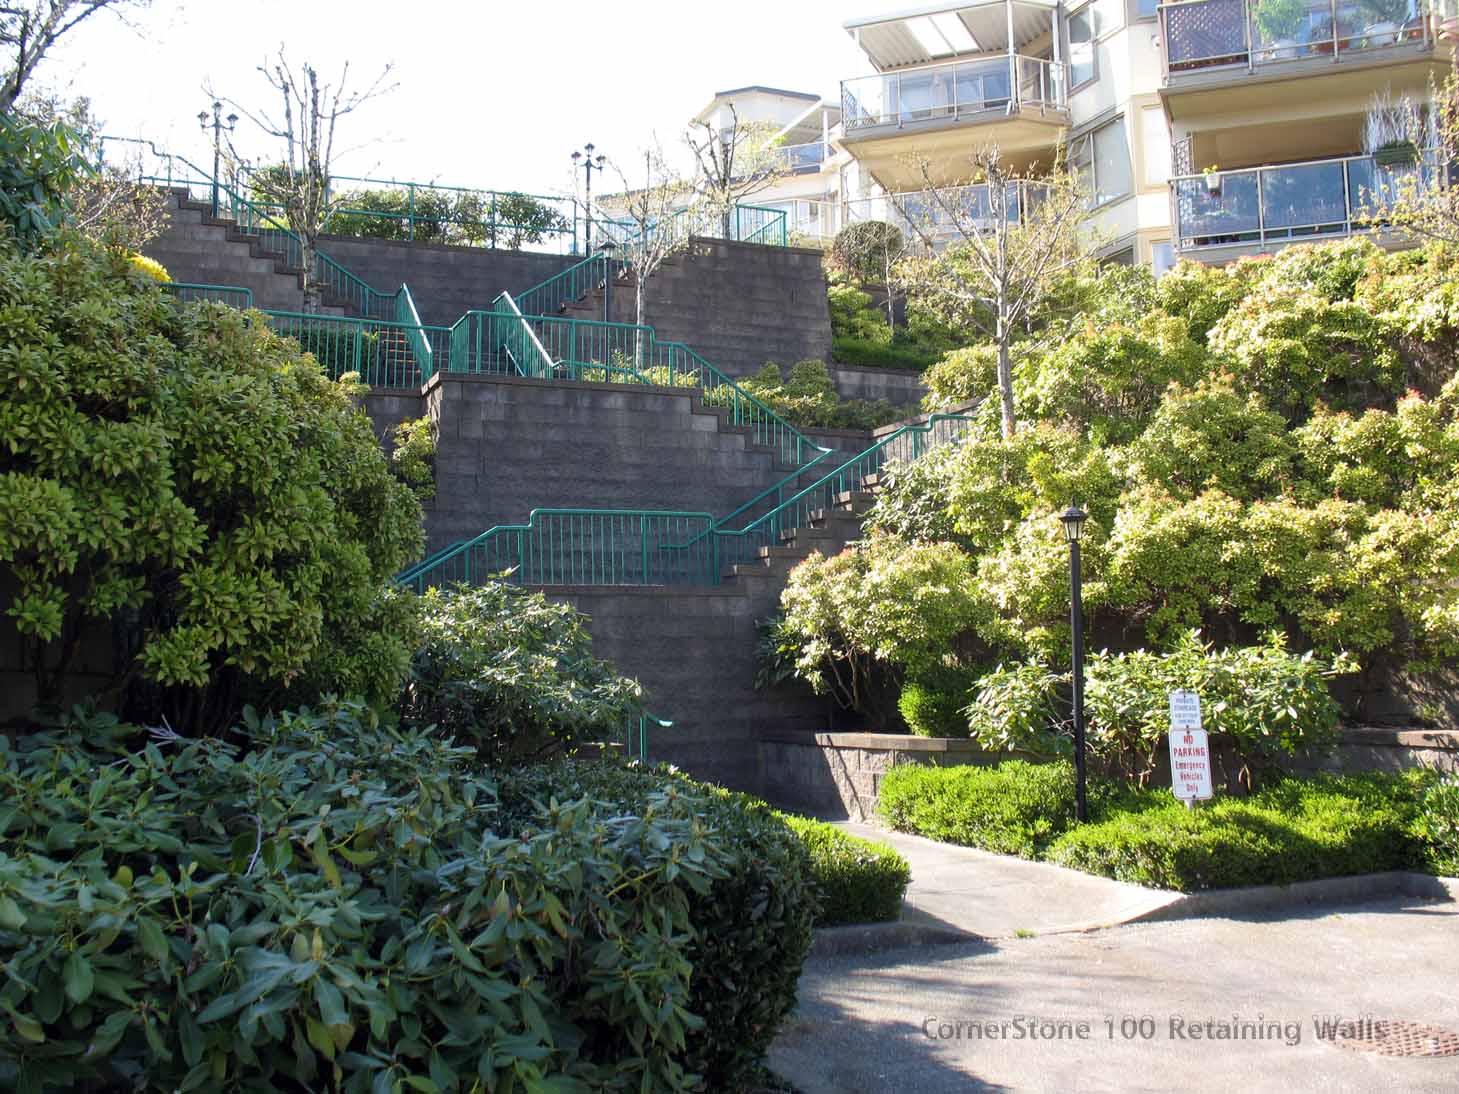 Stairs and terraces built with CornerStone retaining walls